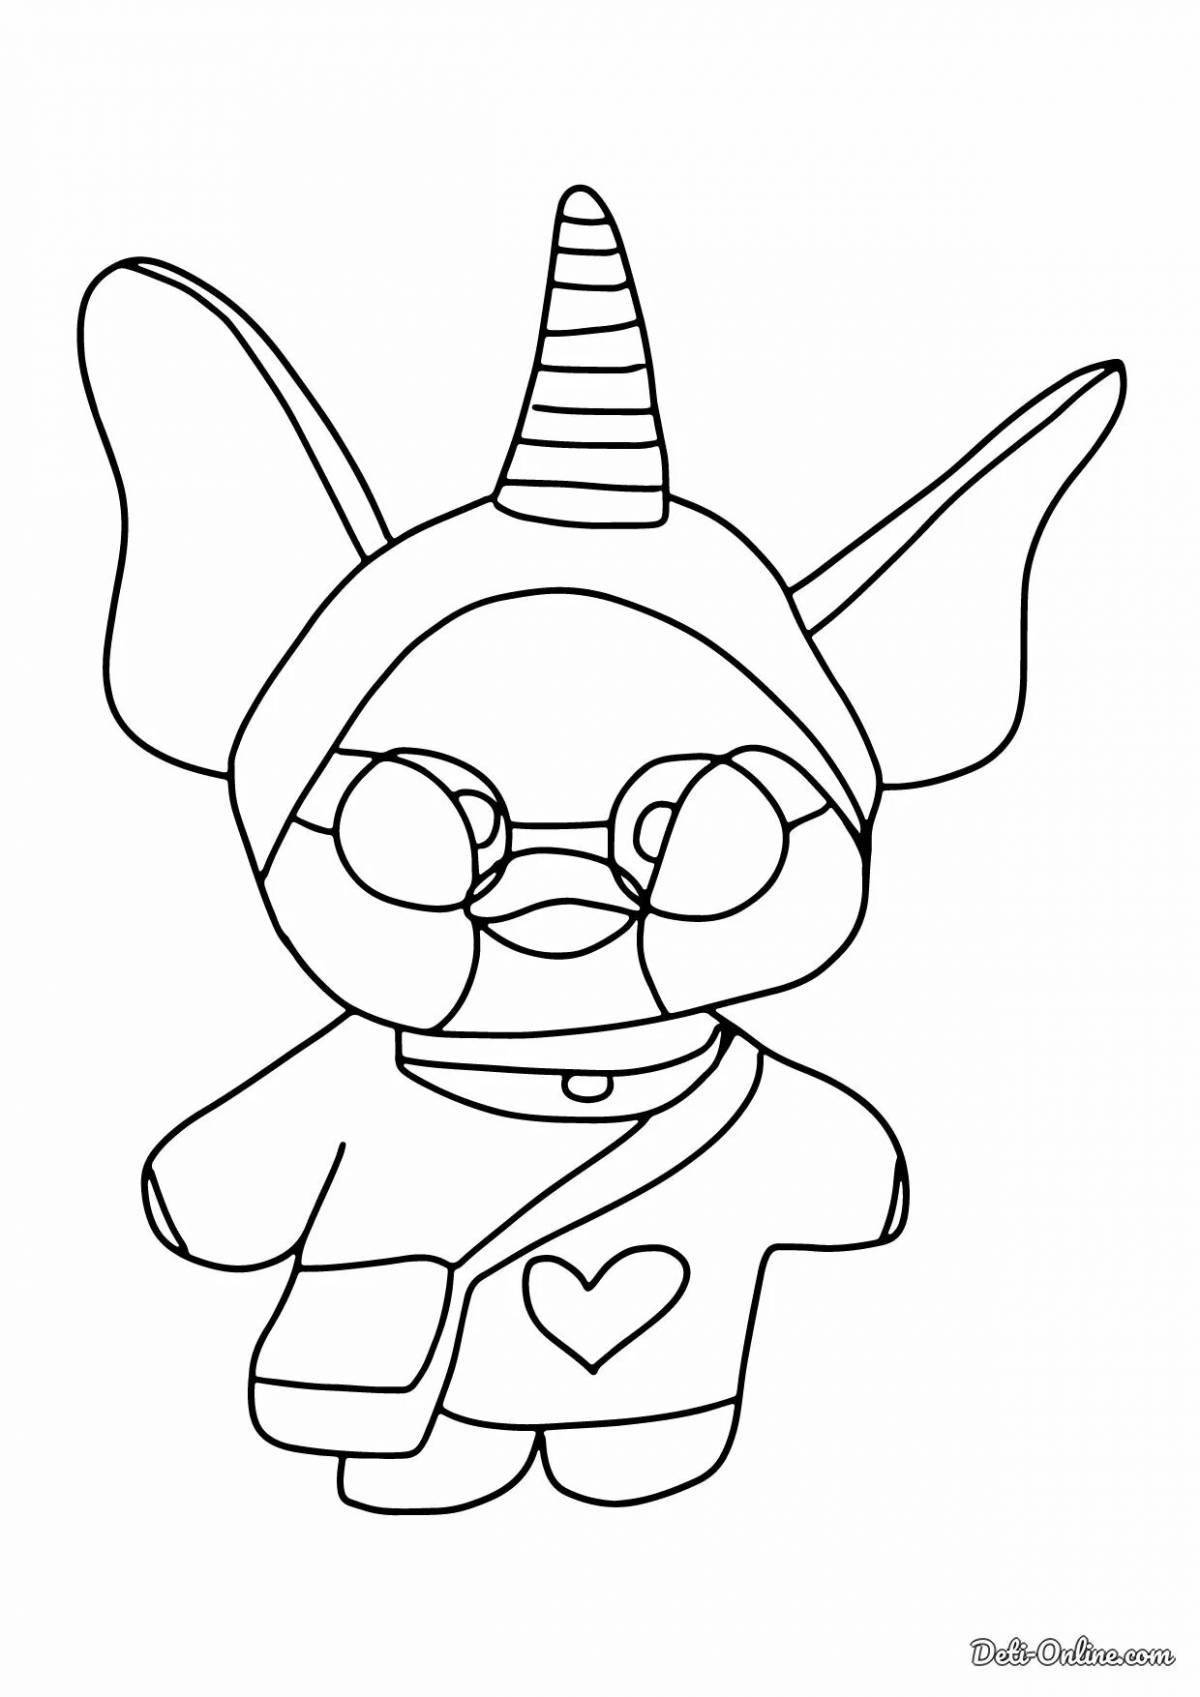 Adorable lalafanfan duck coloring pages for kids